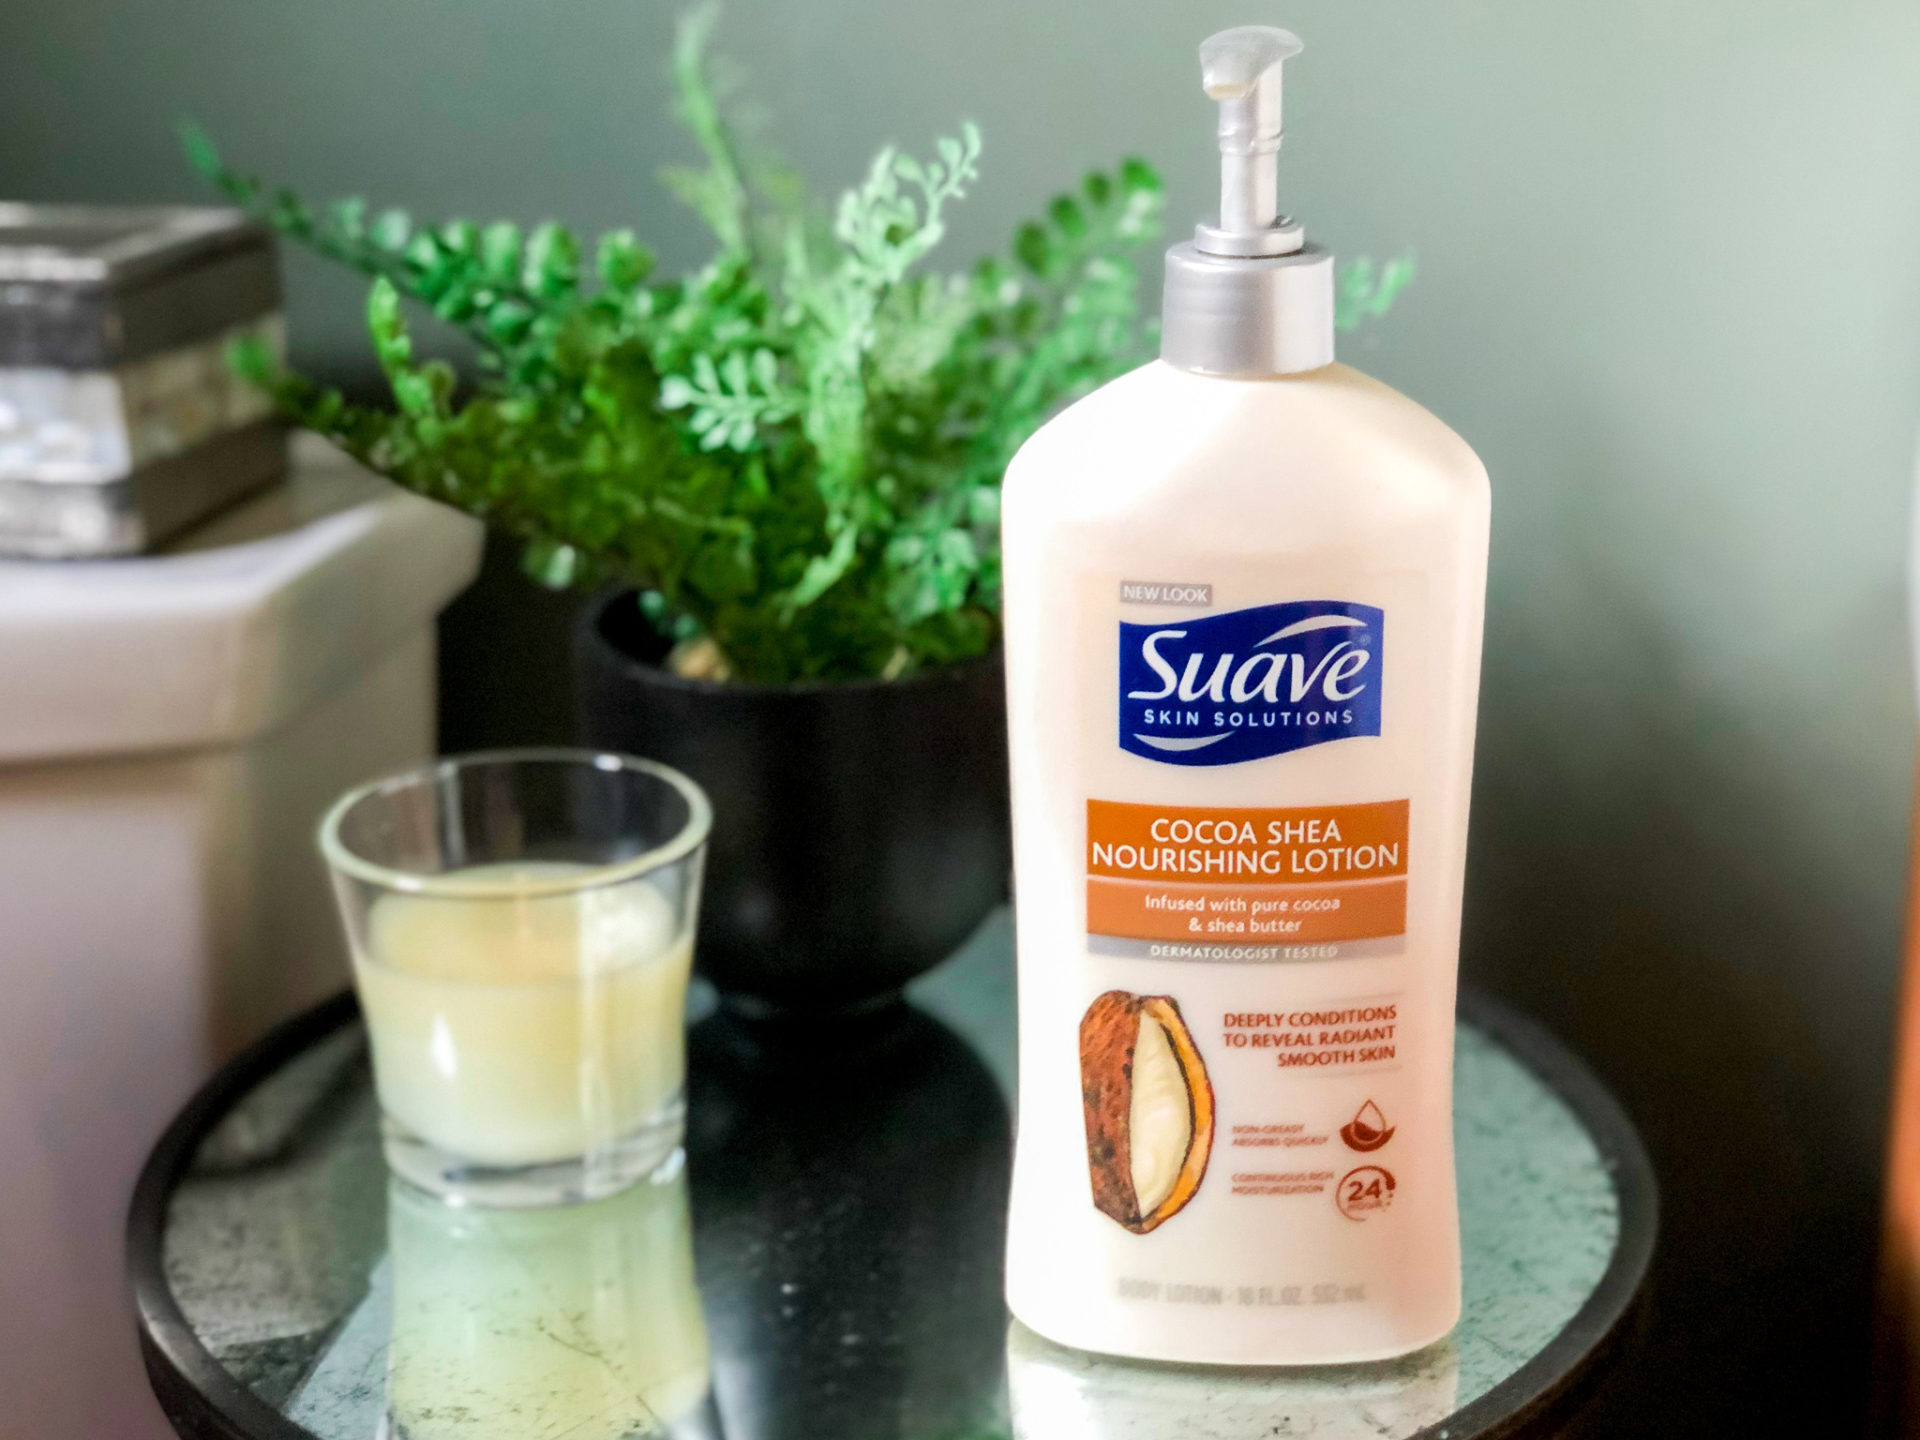 Suave Lotion Is Just $2.99 At Kroger (Regular Price $4.69)